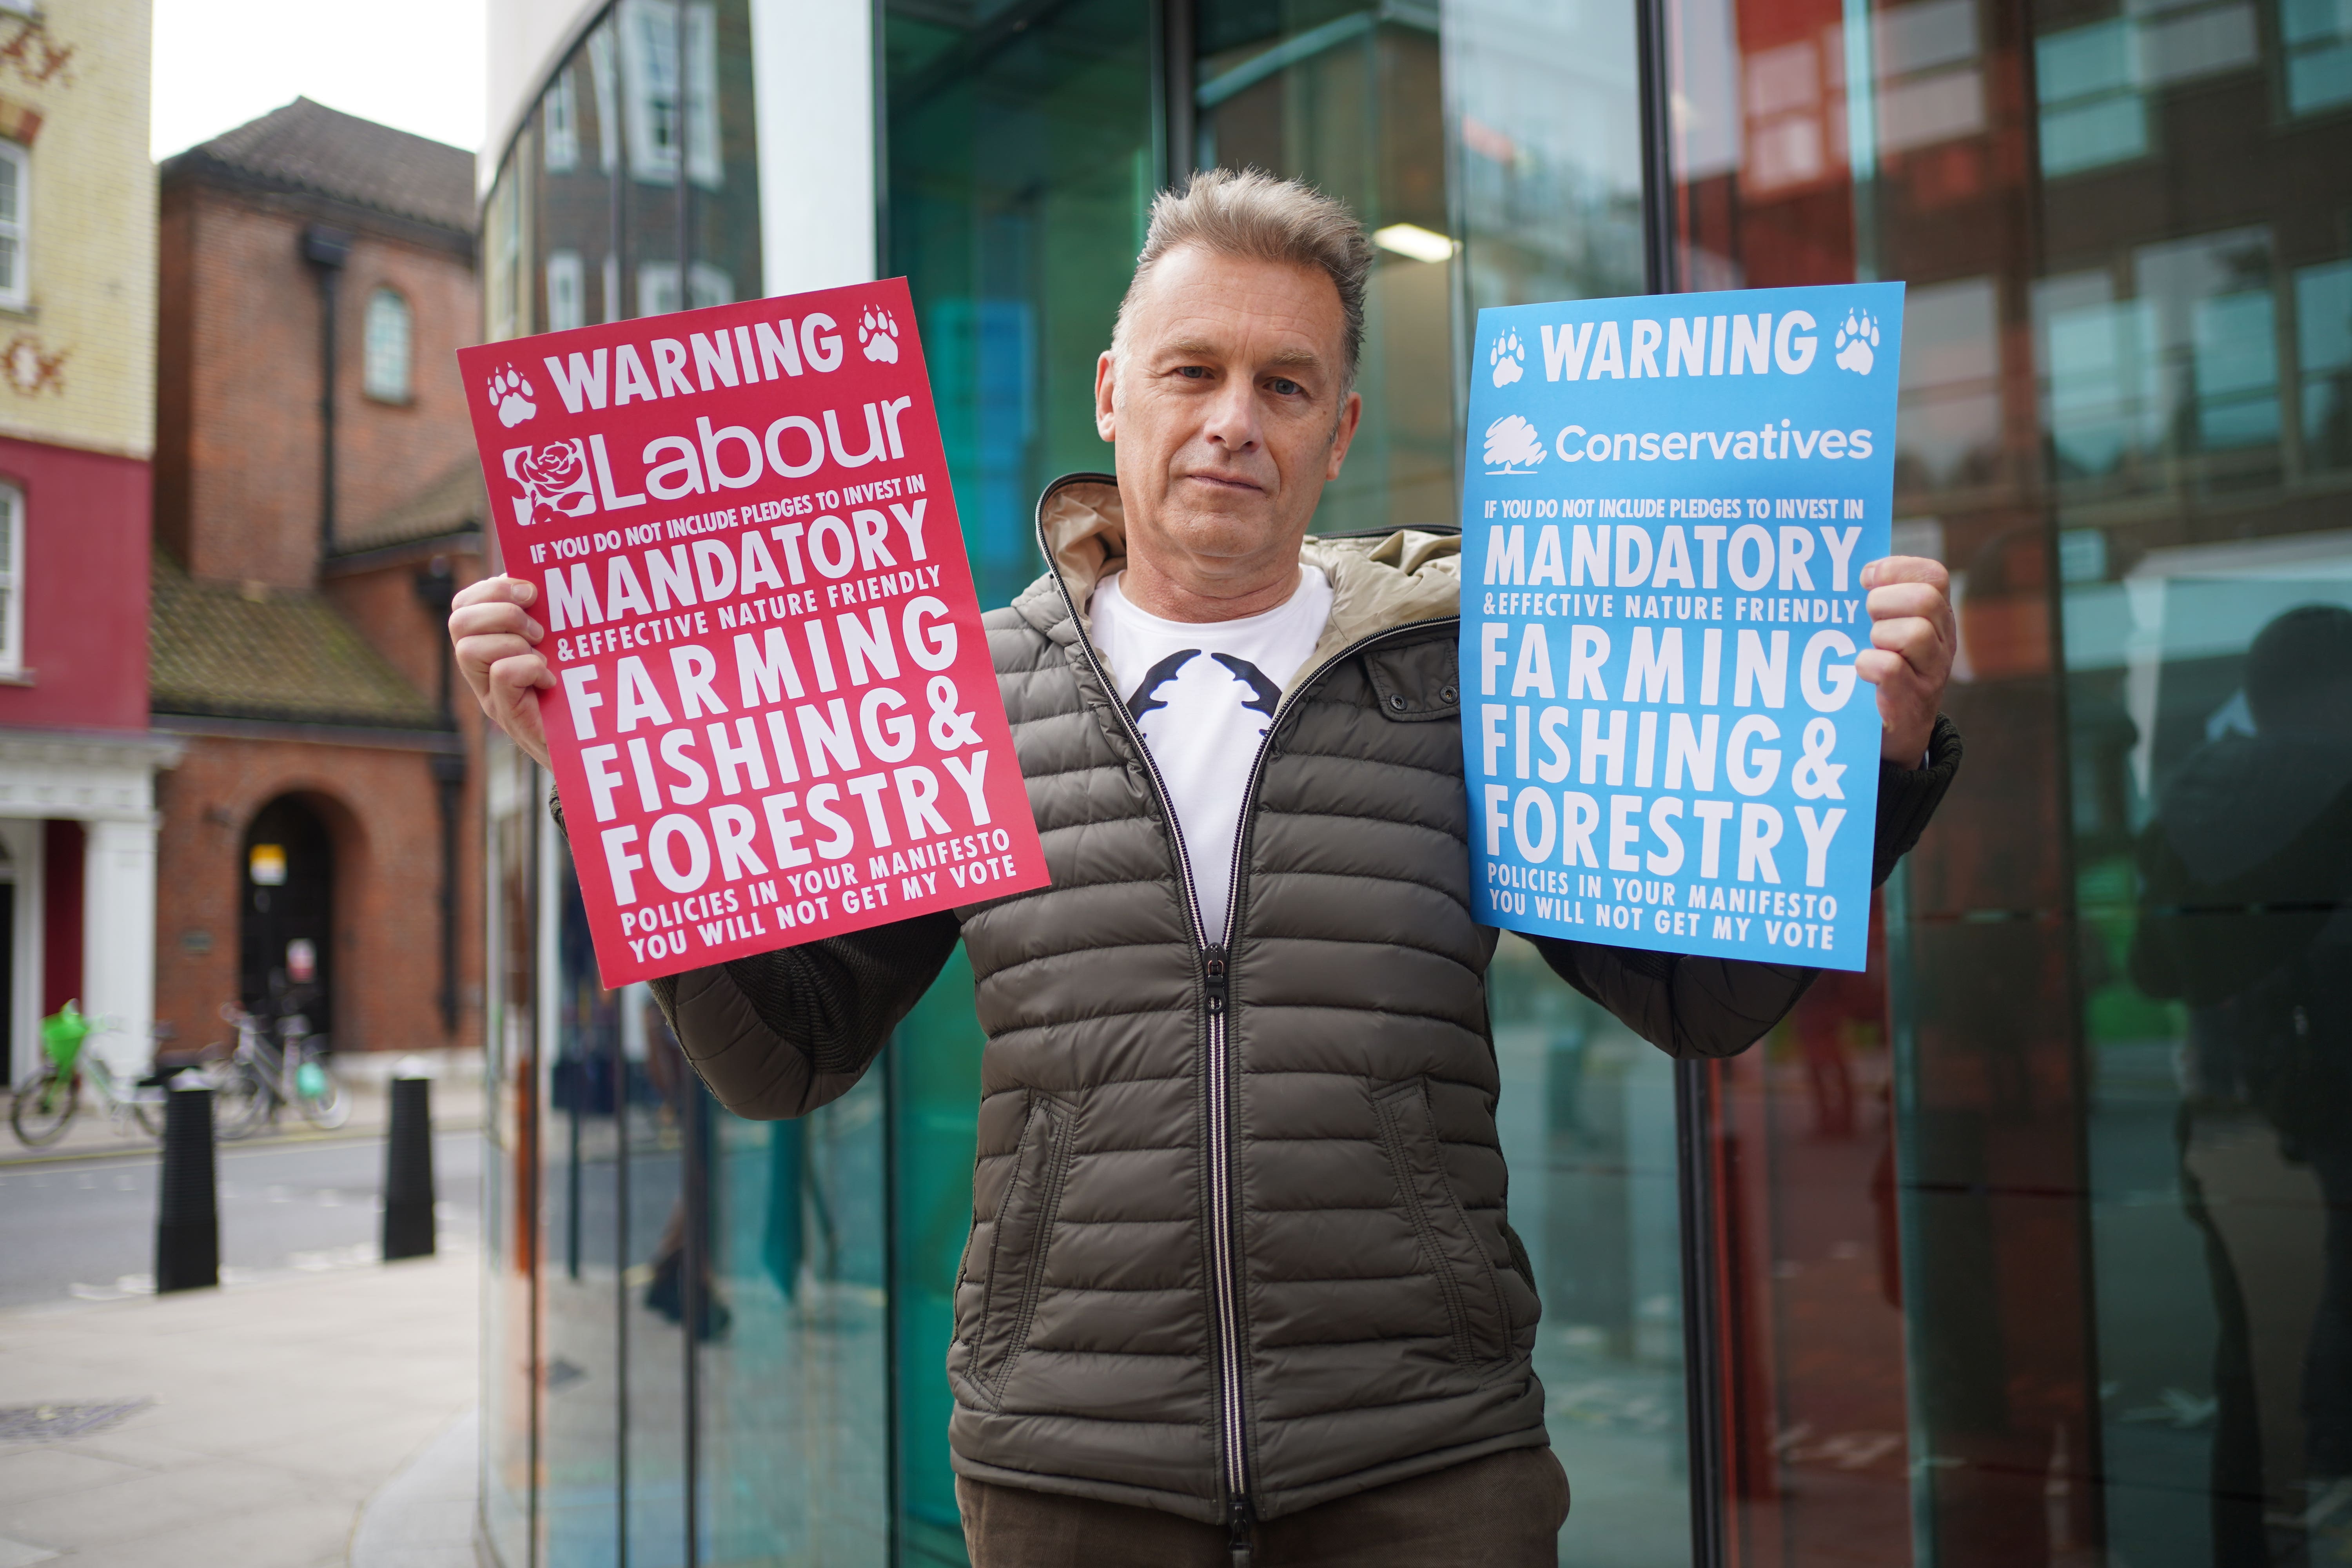 Chris Packham claimed breaking the law to campaign against climate change policies was ‘ethically responsible’